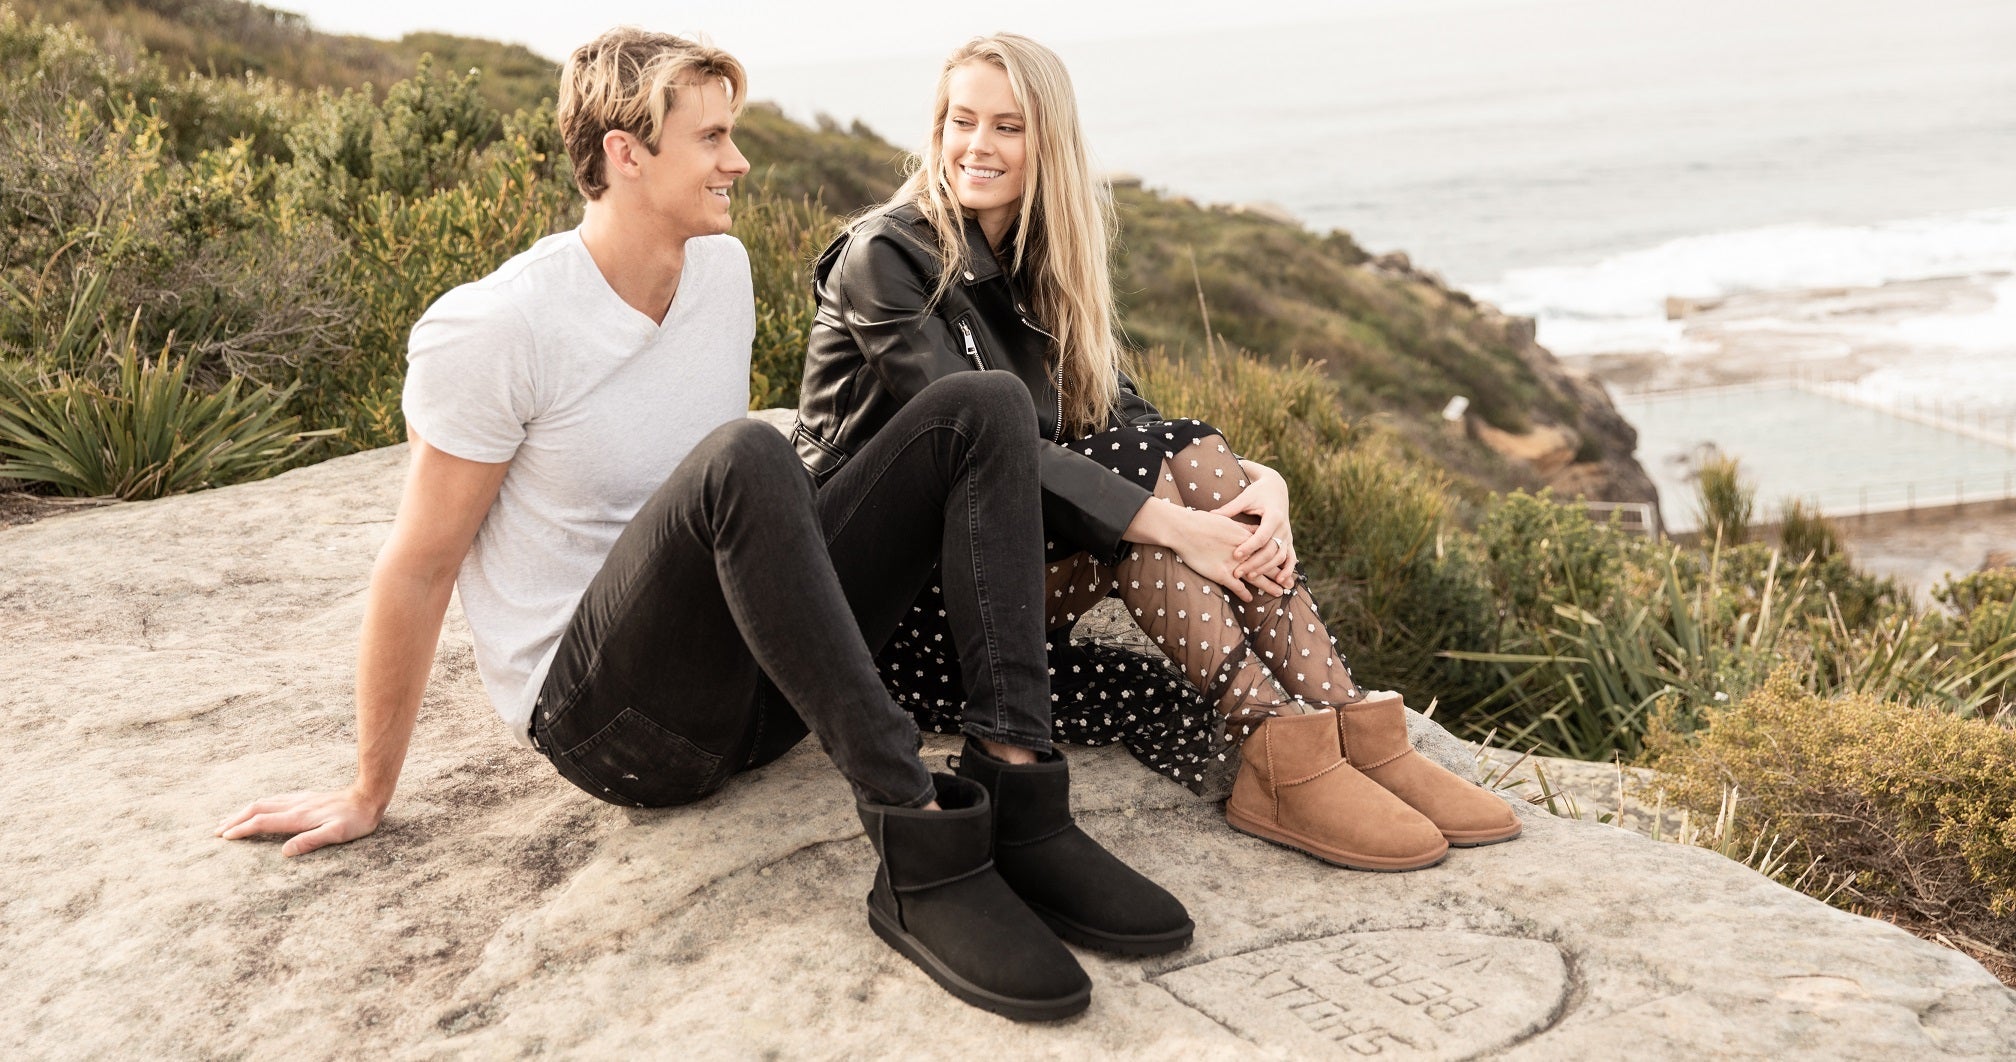 Ugg Boots - A Guide to Choosing the Right Ugg Boot Style for